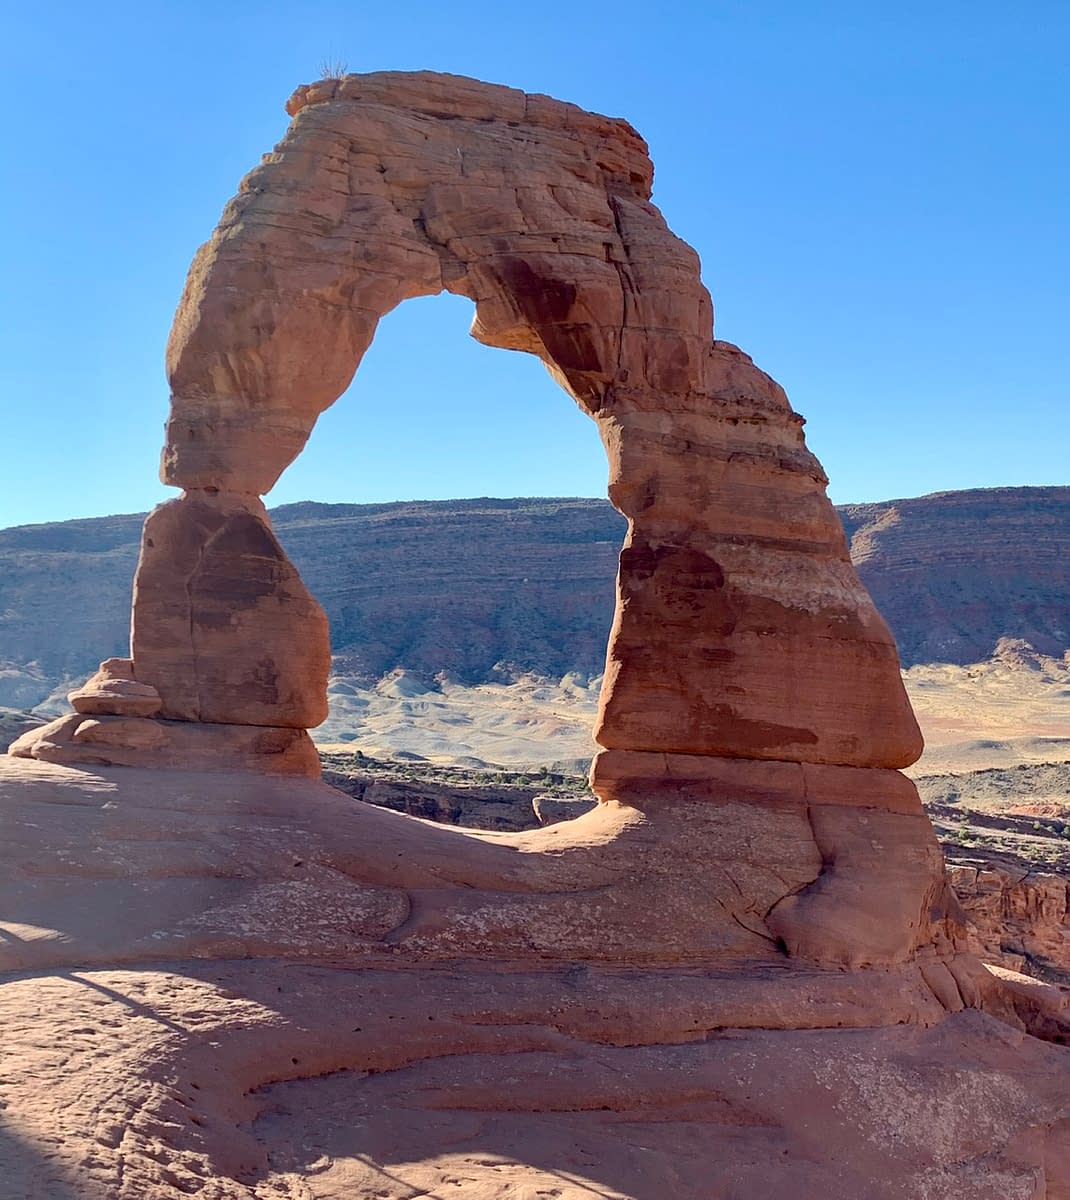 Delicate Arch in Arches National Park